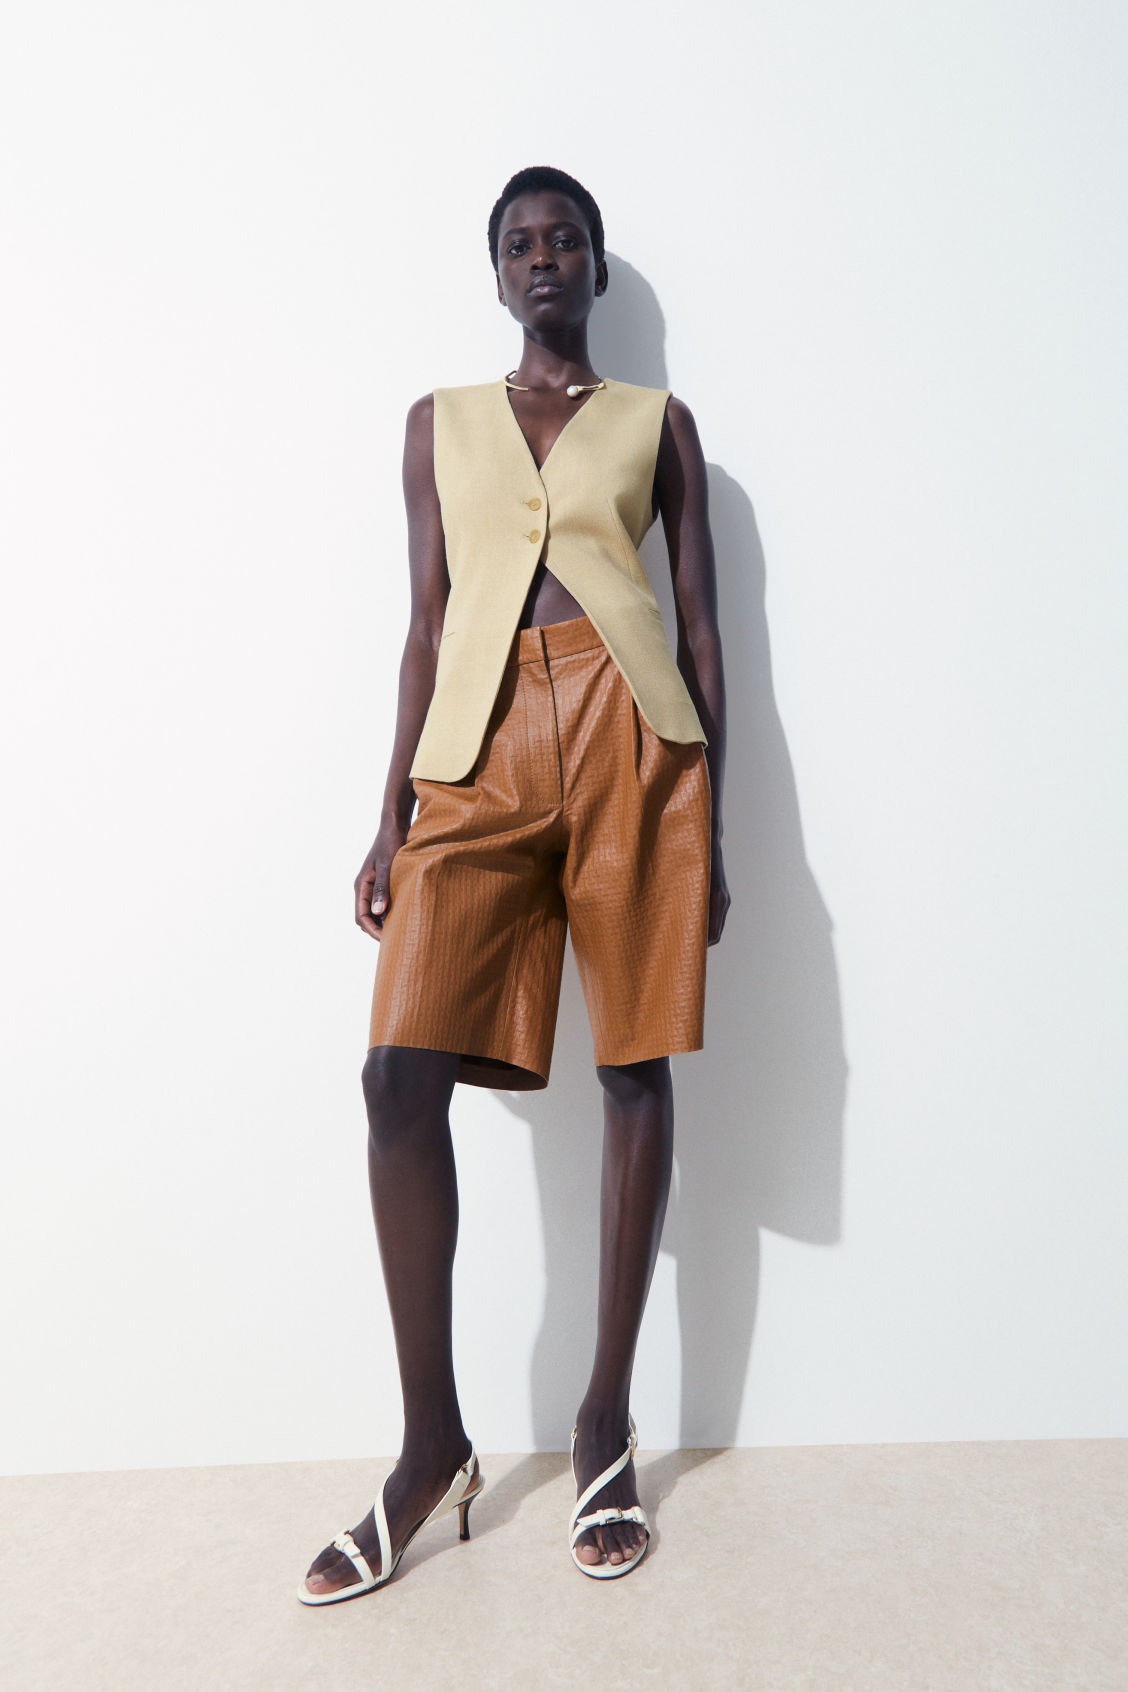 THE EMBOSSED-LEATHER BERMUDA SHORTS, £300, COS